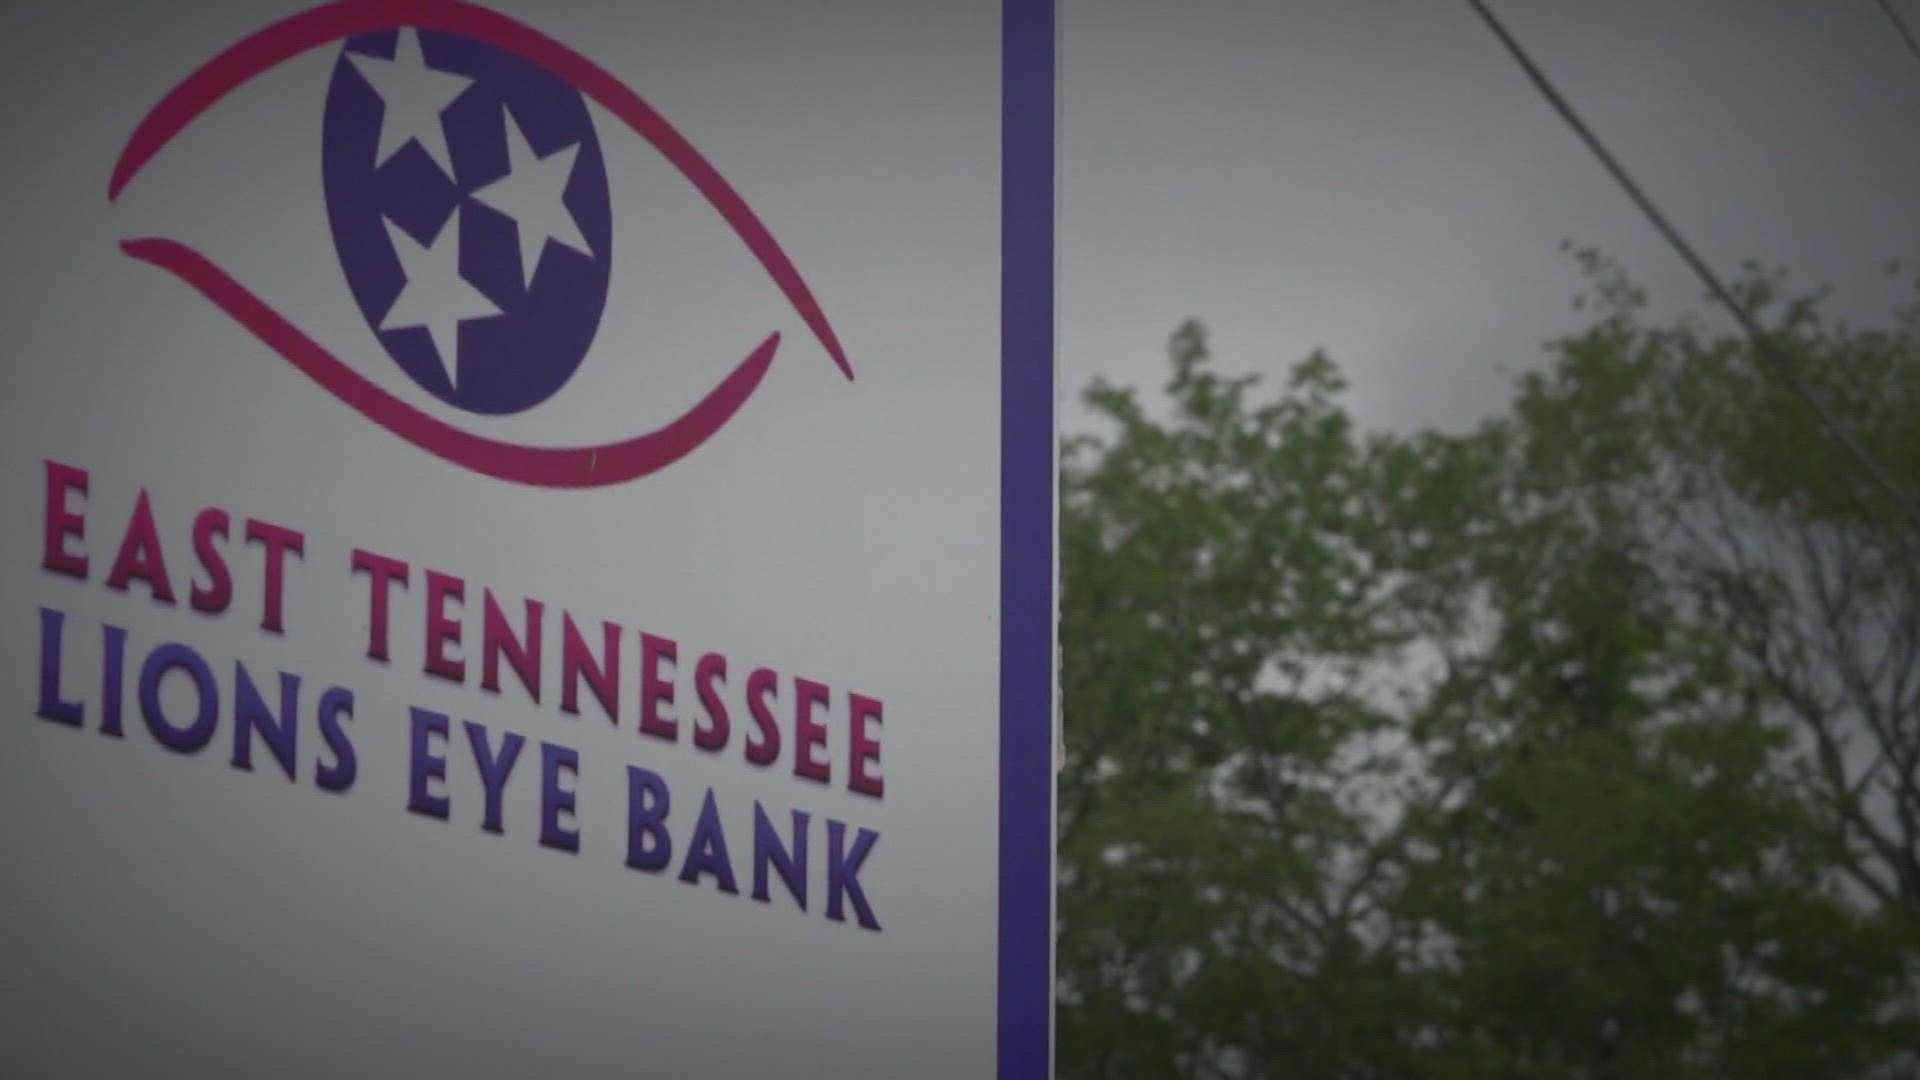 We reviewed decades of documents from the Internal Revenue Service. As the East Tennessee Lions Eye Bank grew, so did the executive compensation.